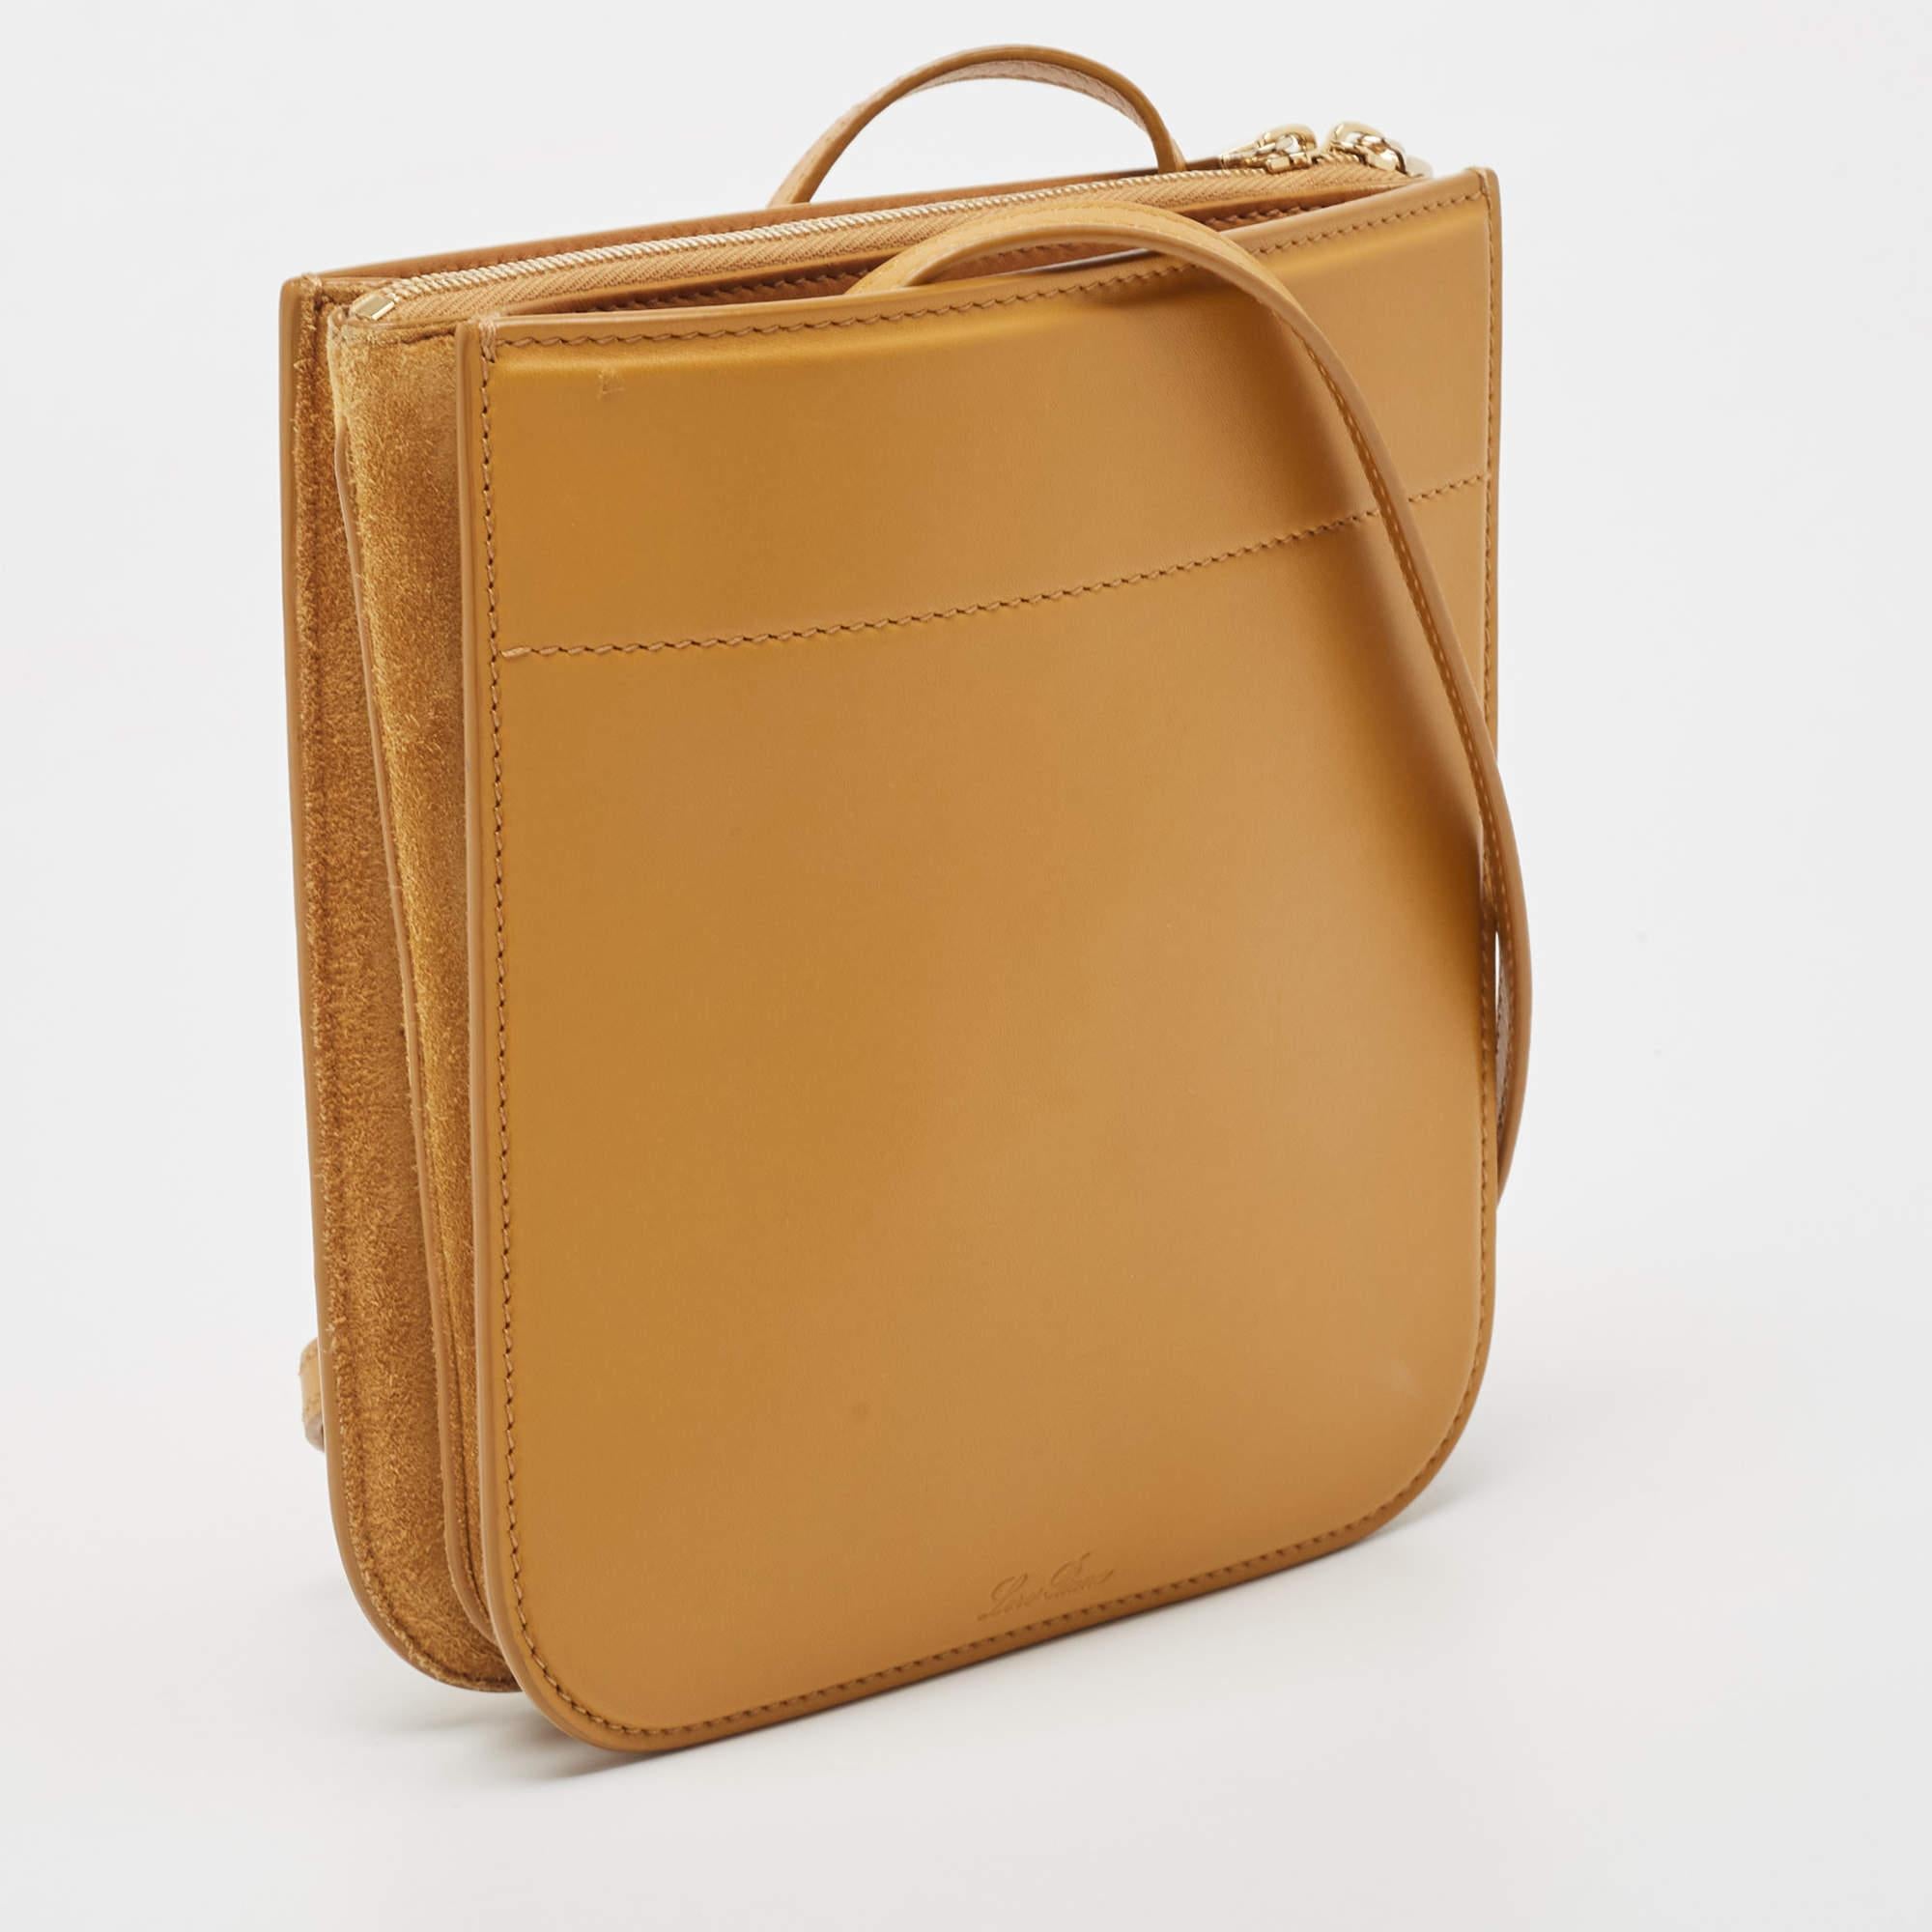 This shoulder handbag by Loro Piana is a practical choice perfect for carrying your daily needs. Presenting a leather & suede handbag which is an absolute mixture of style and utility. This My Way crossbody bag from Loro Piana features a long